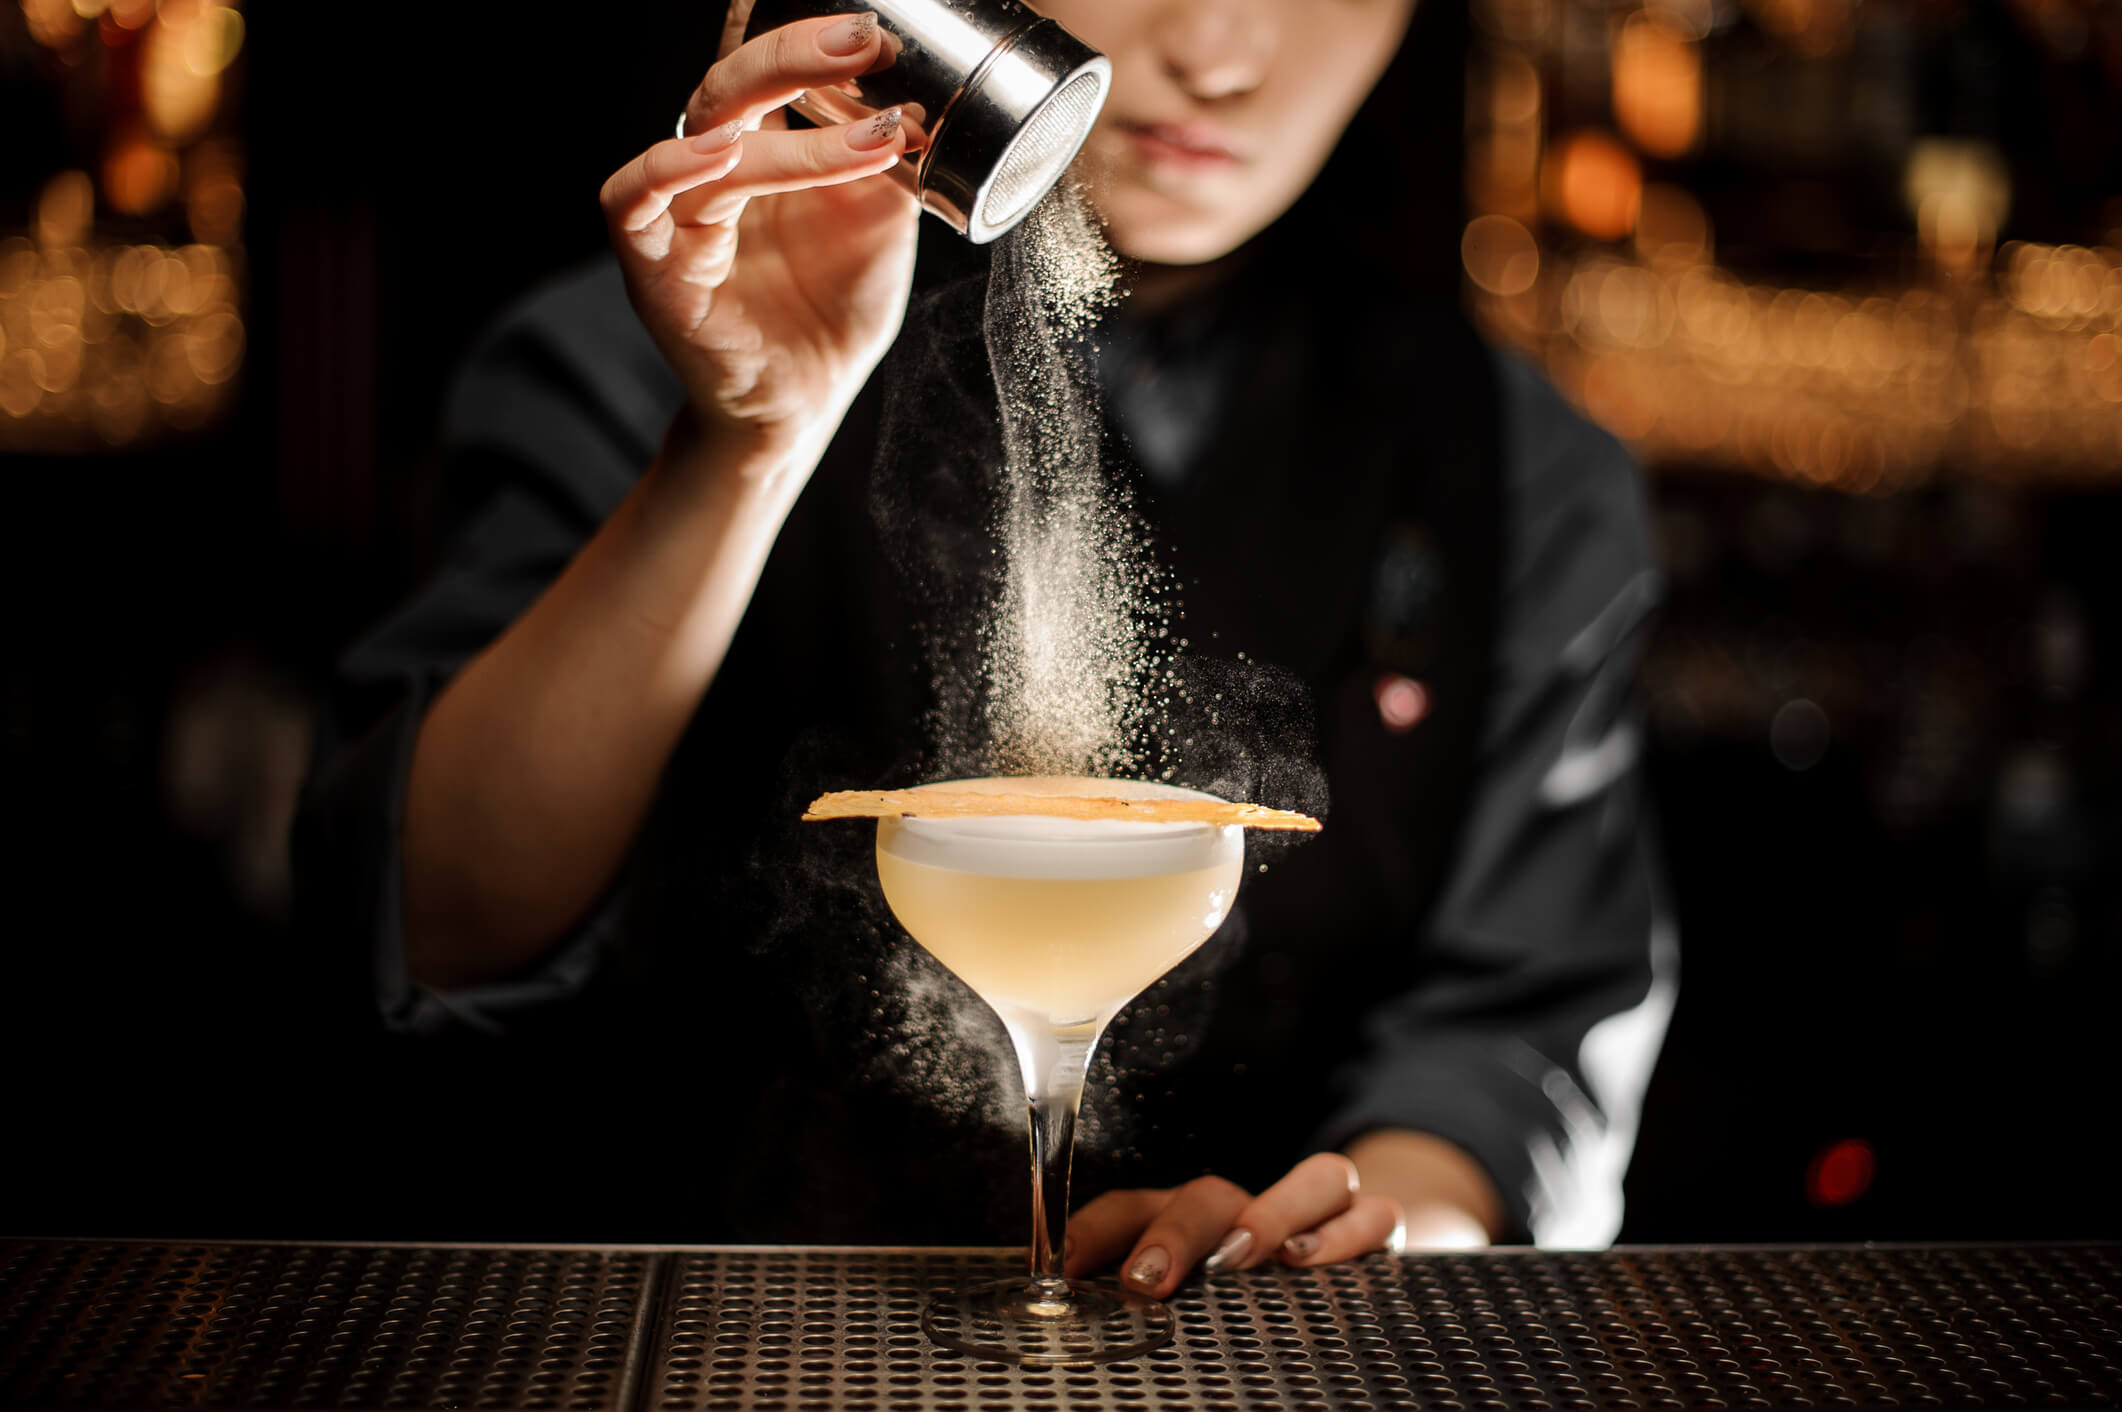 Female bartender finishes making a craft cocktail